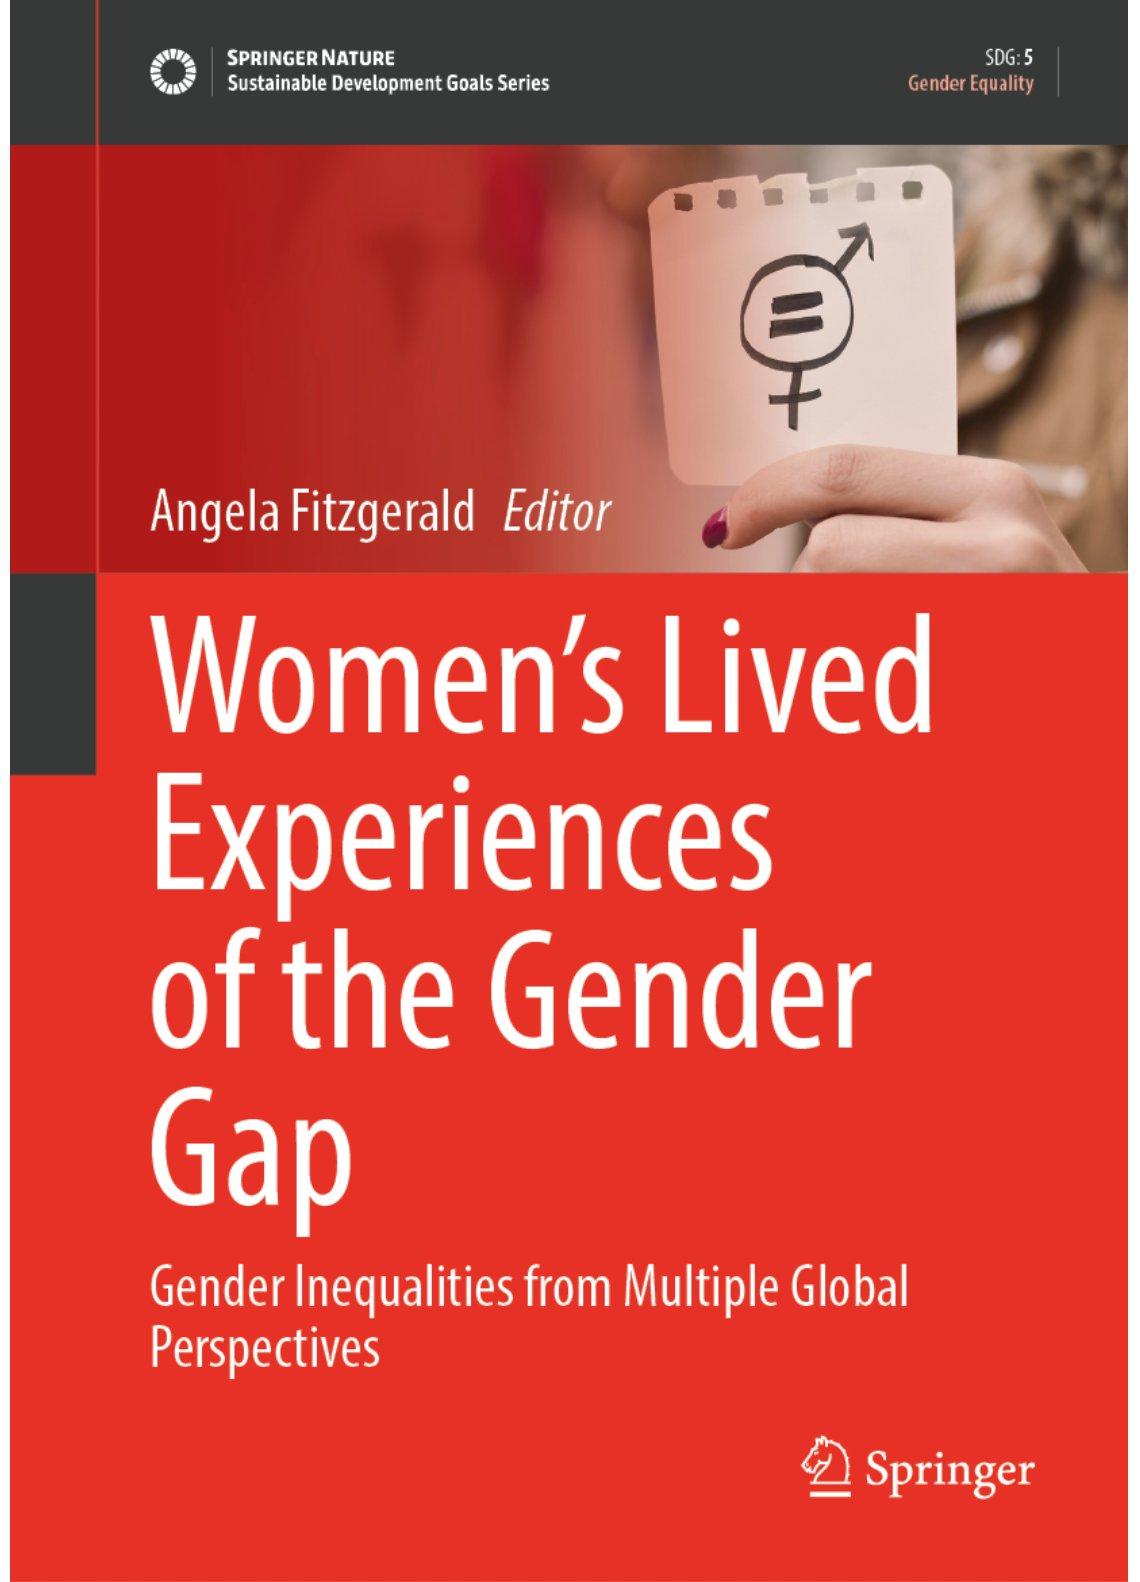 ”Women's Lived Experiences of the Gender Gap”, Angela Fitzgerald